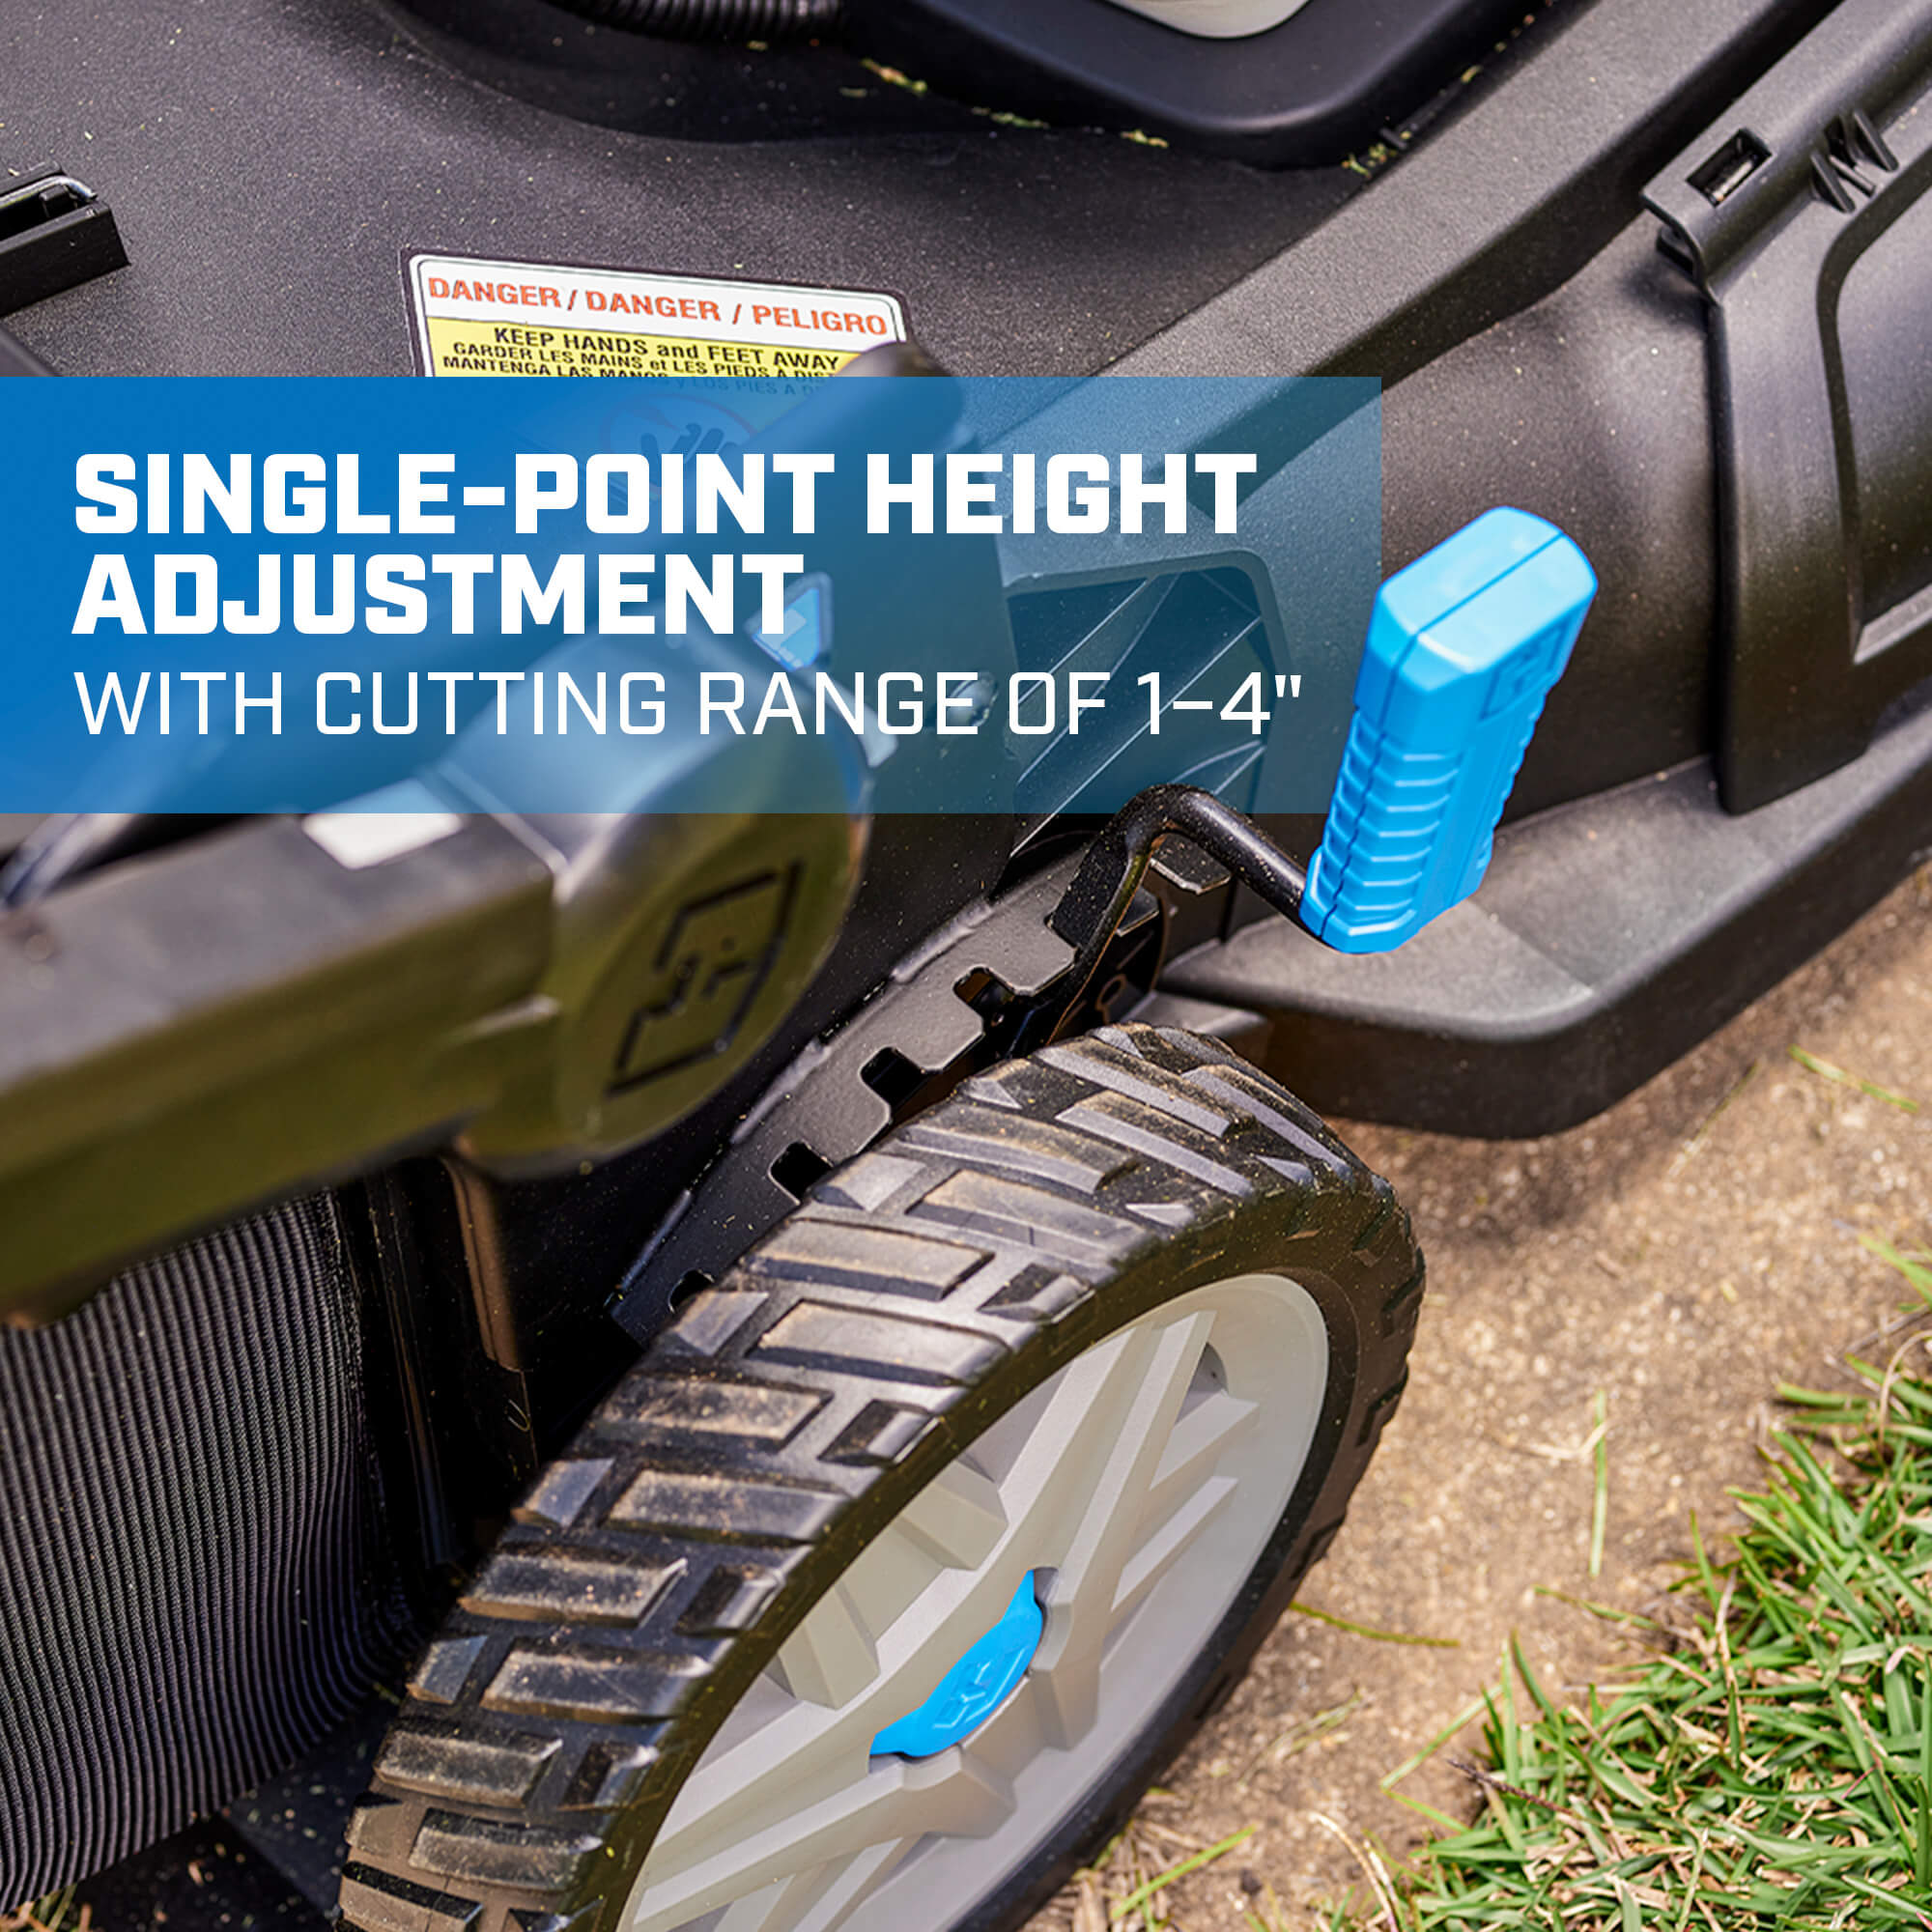 single-point height adjustment with cutting range of 1-4"